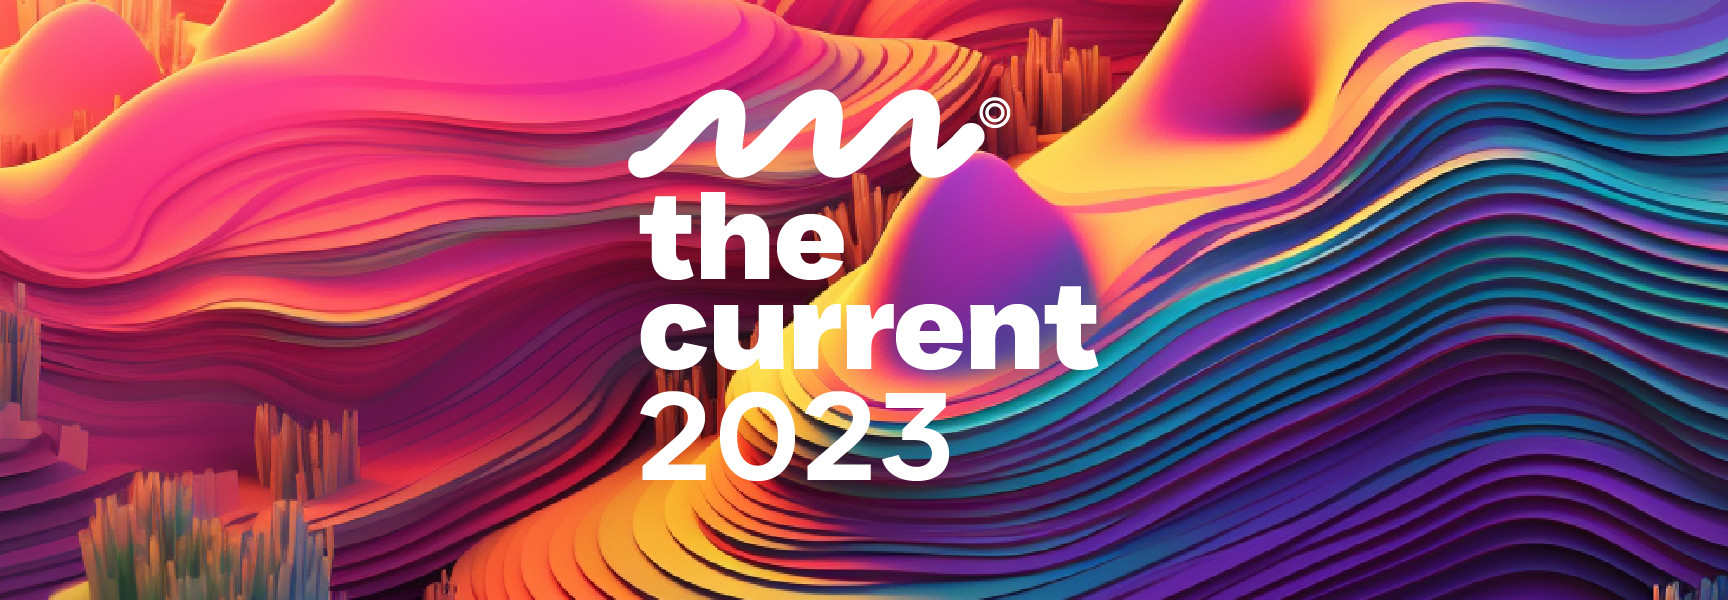 Revisit The Current 2023: Metaverse and AI for Digital 1st Brand Breakthroughs!